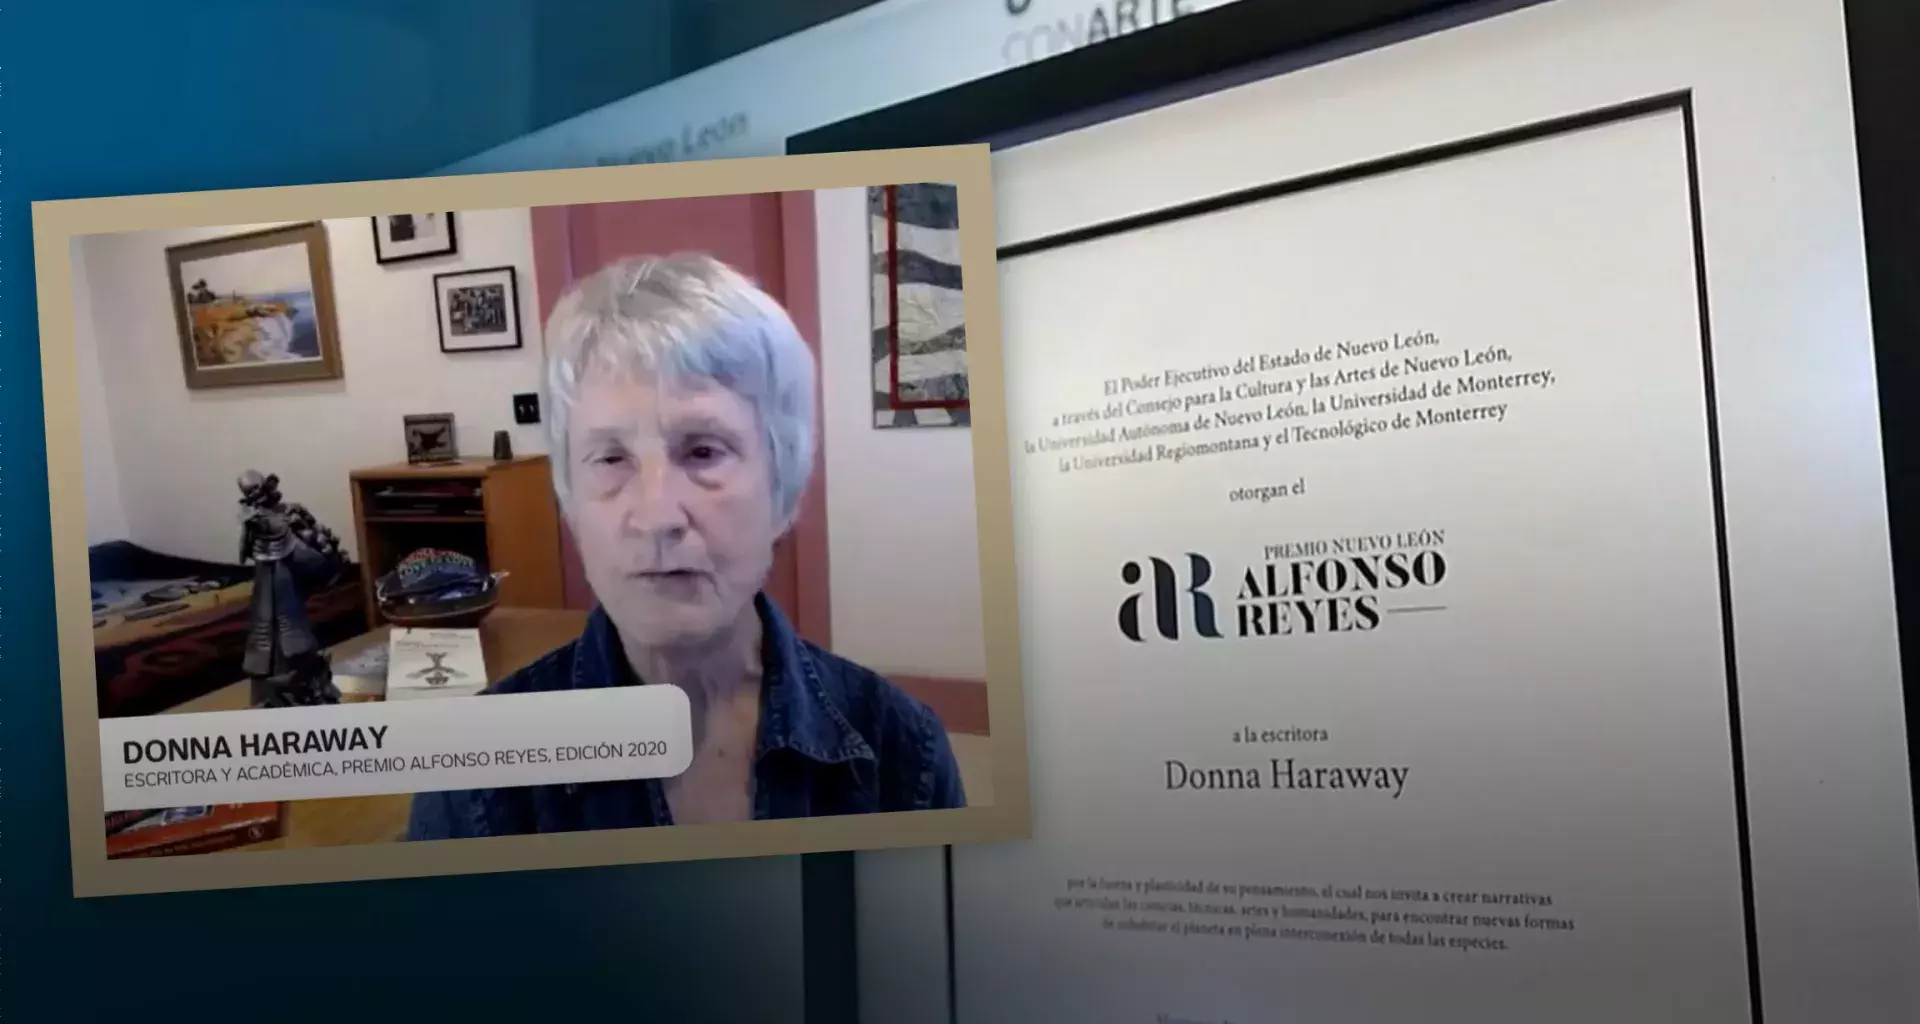 Tec participates in award recognizing writer Donna Haraway